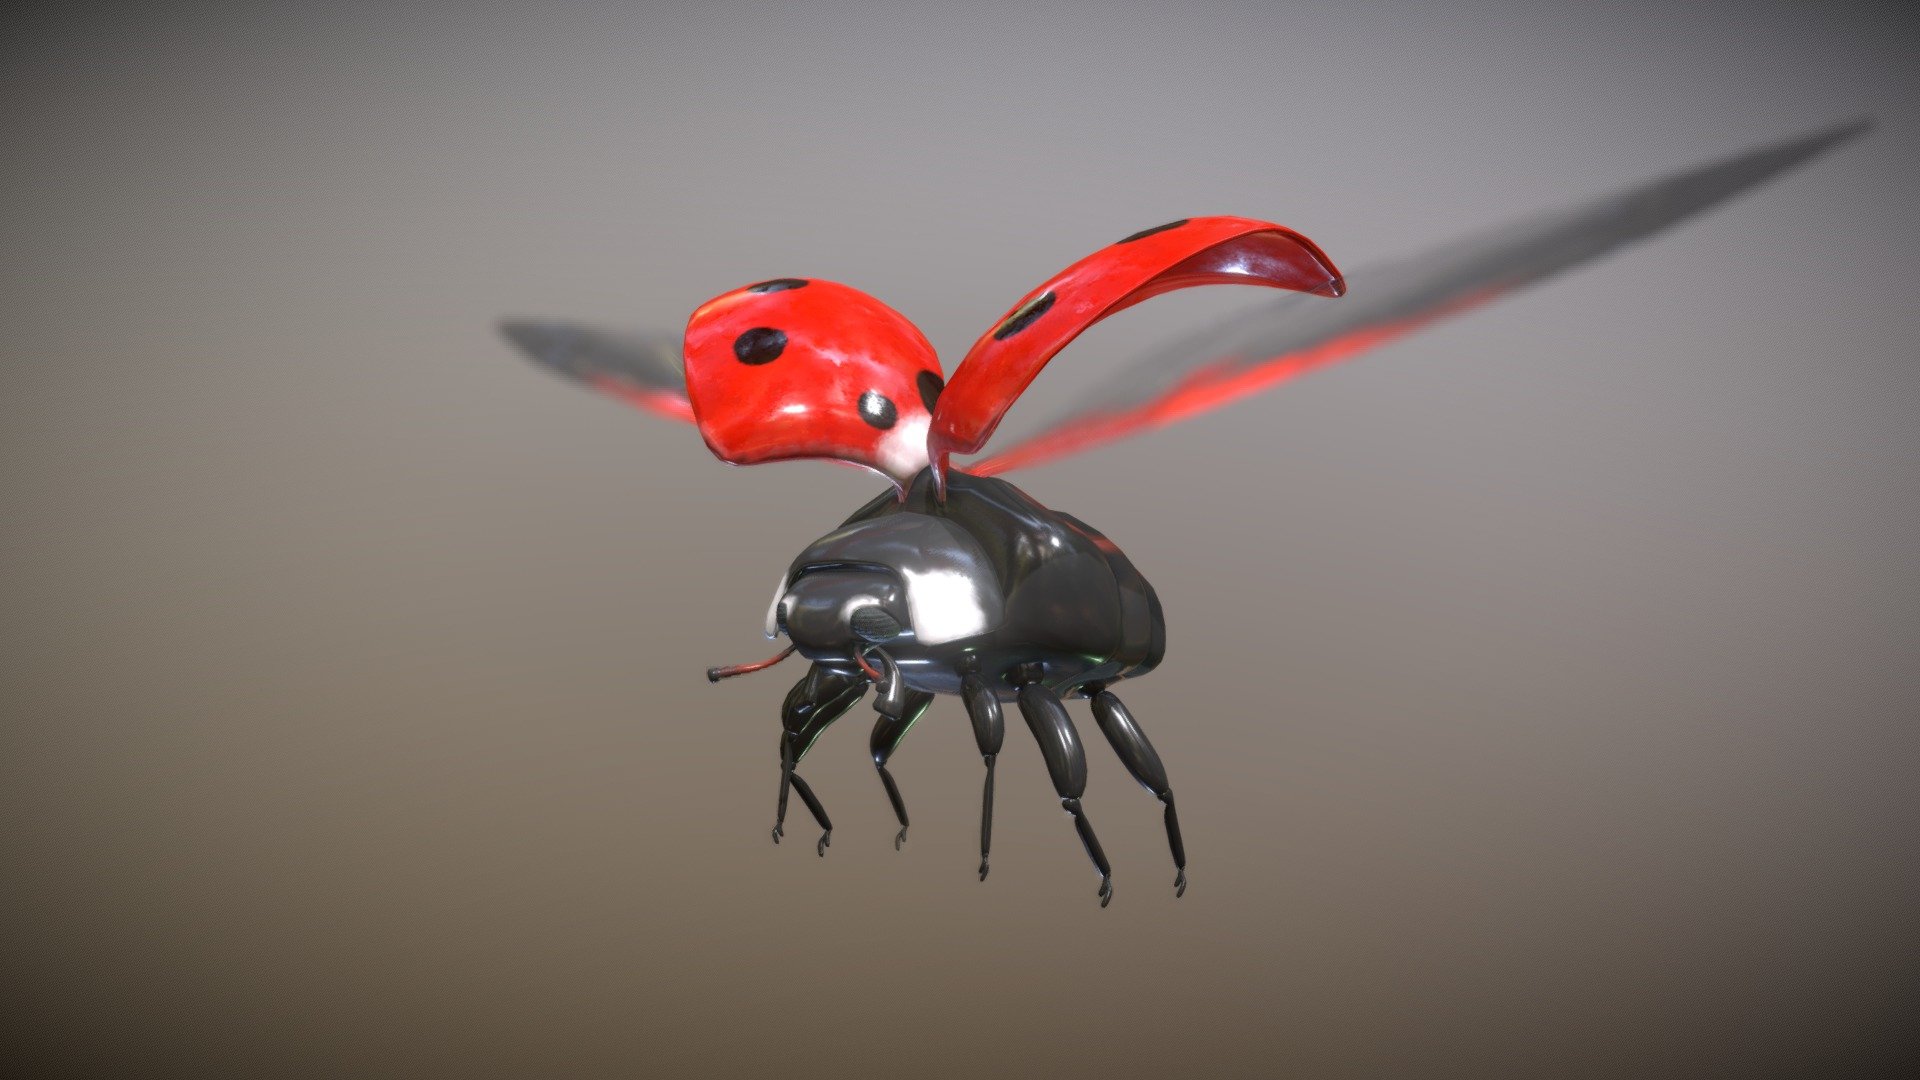 It's a bug model I created during TK Game Jam 2022 in Wrocław. It is an enemy in our Unral Engine game called &ldquo;Water of life: Let it drop